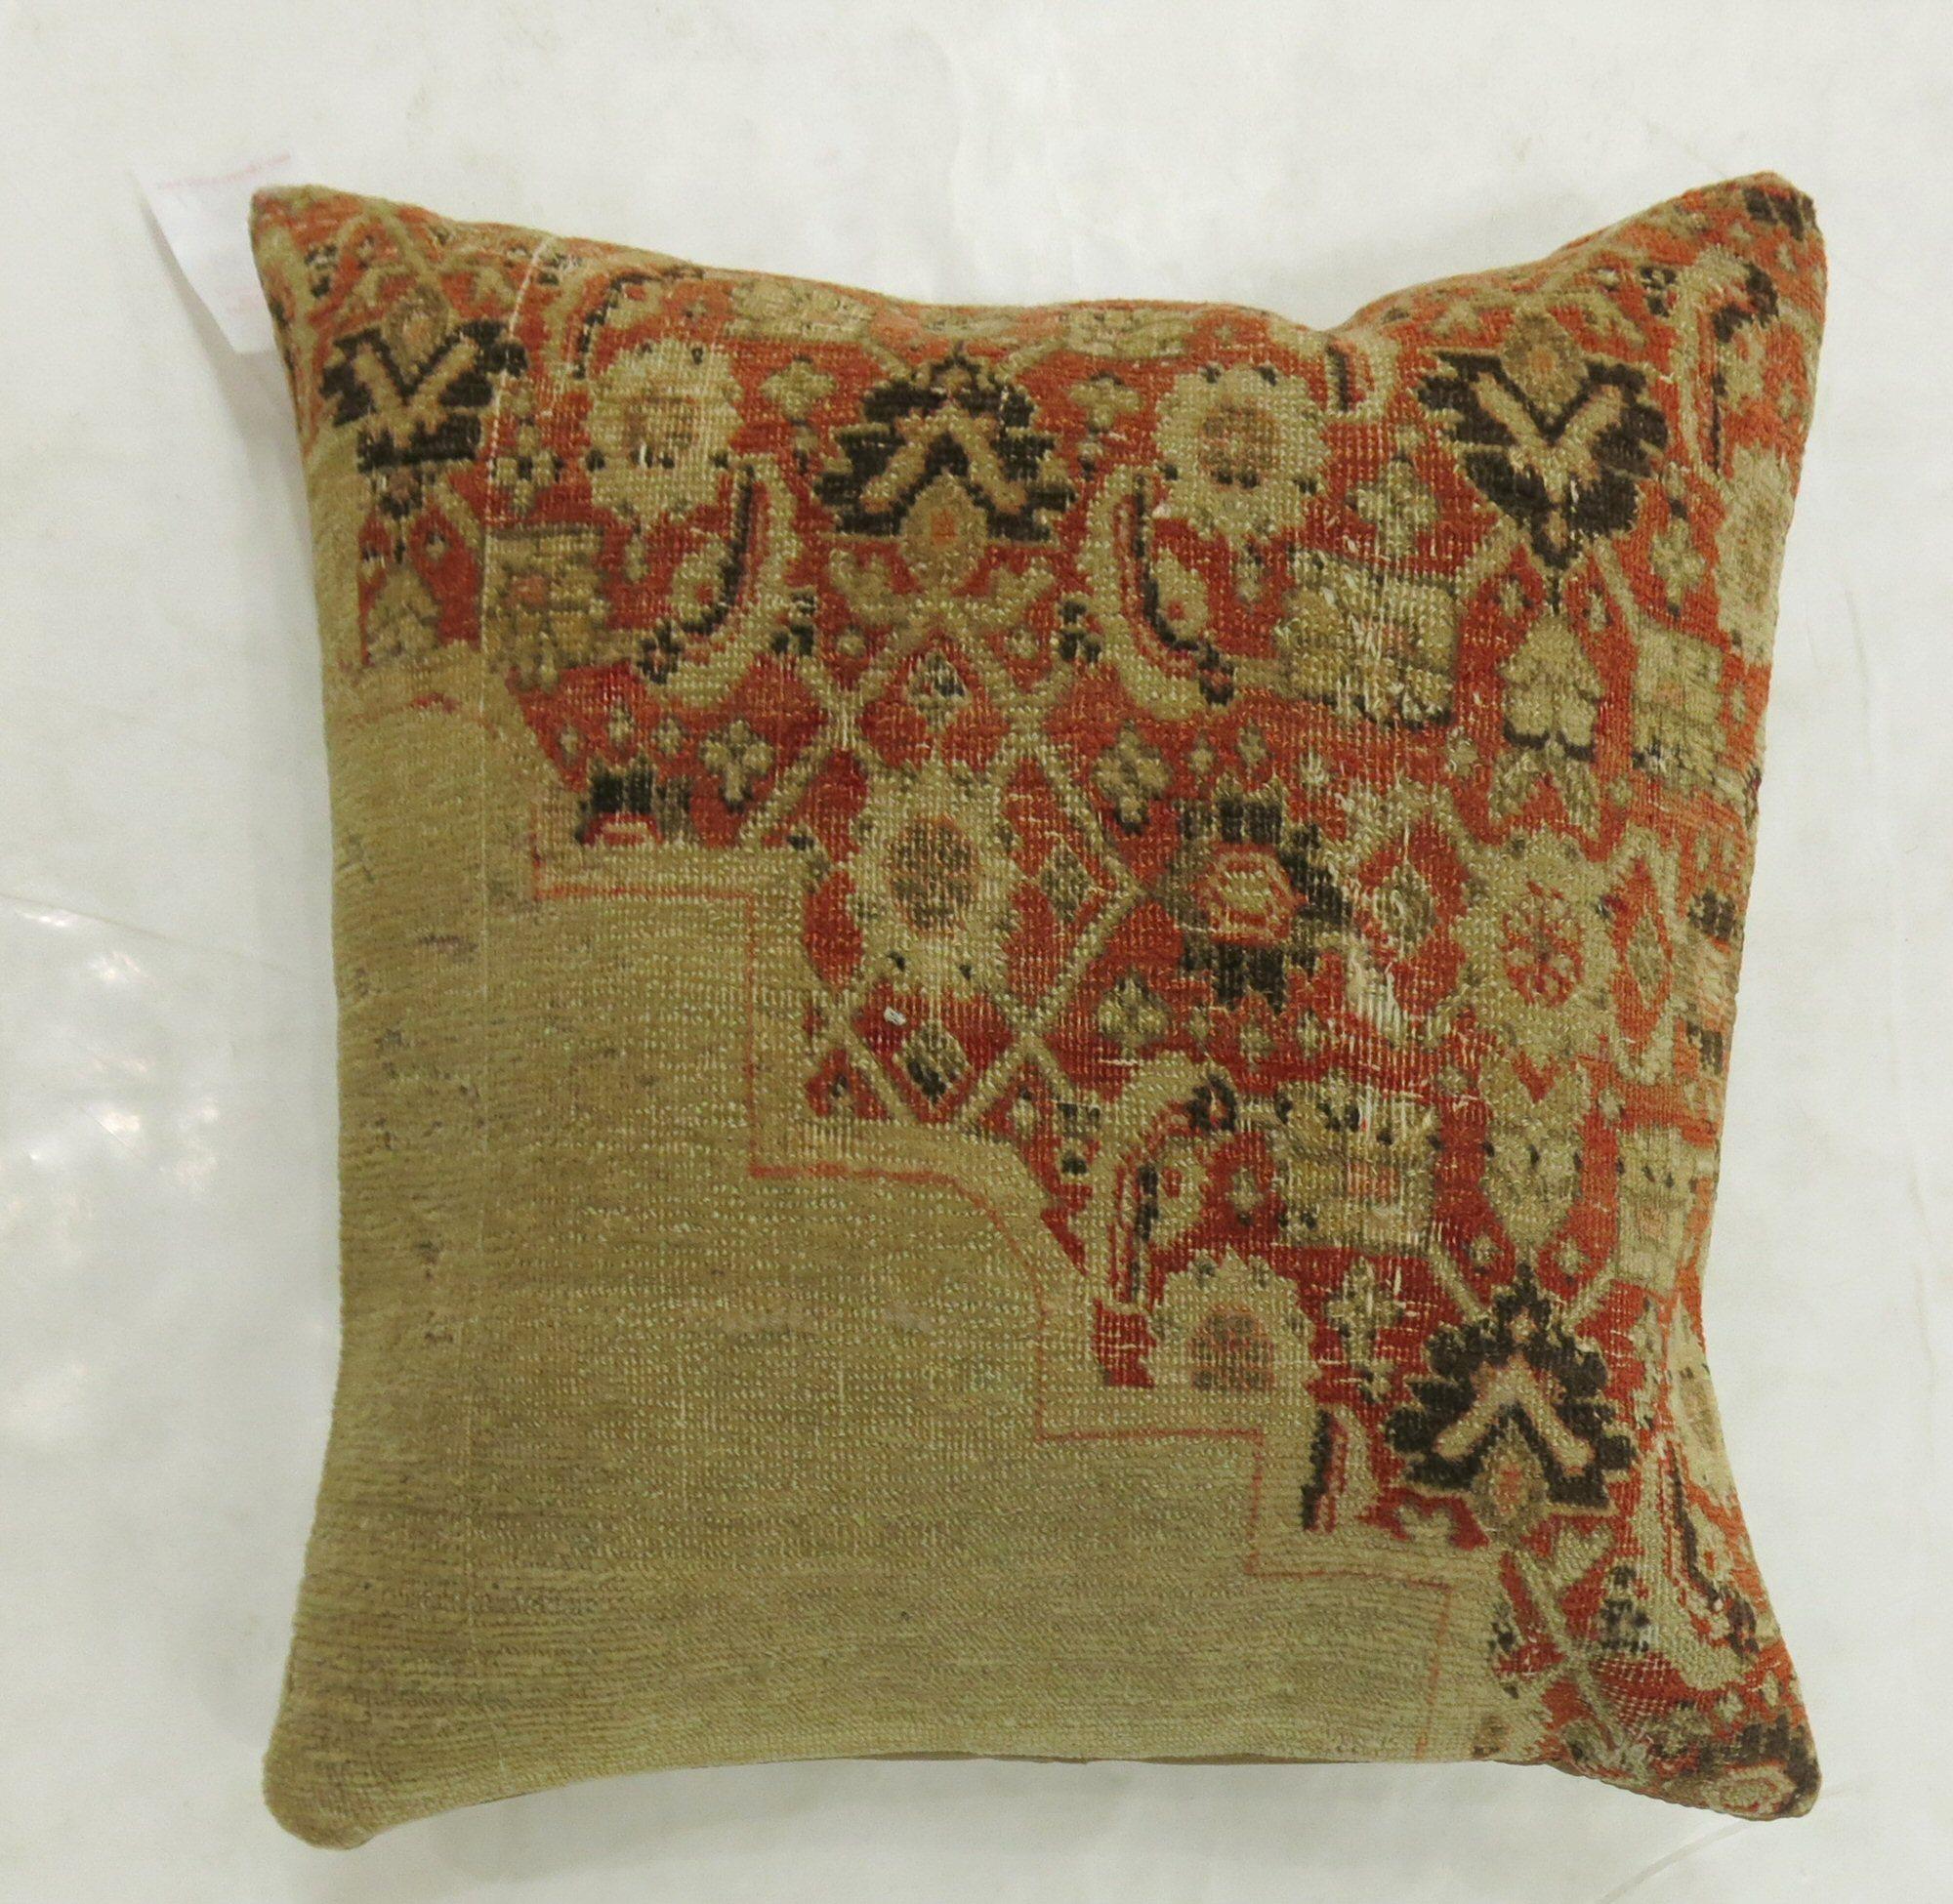 Hand-Woven Orange and Beige Antique Tabriz Square Rug Pillow